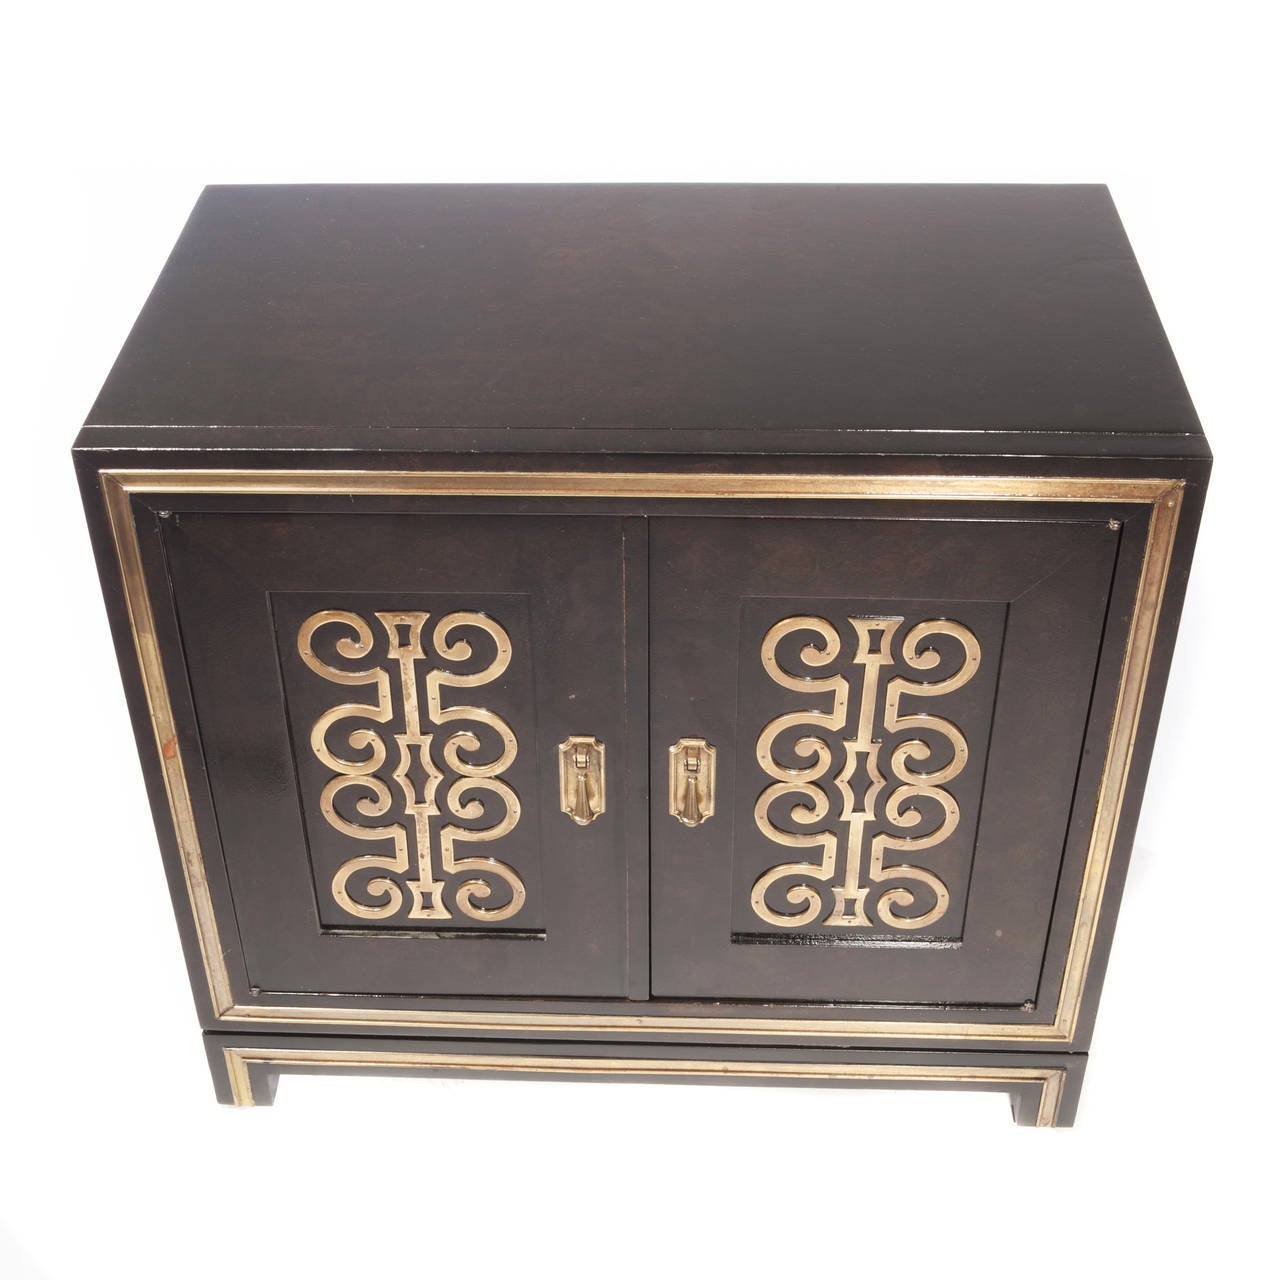 Swanky burl wood sideboard with brass trim and two doors with inset panels, each featuring decorative brass work, circa 1960s. The interior has one drawer and a single shelf. Mastercraft label to inside of drawer. 

See this item in our Brooklyn